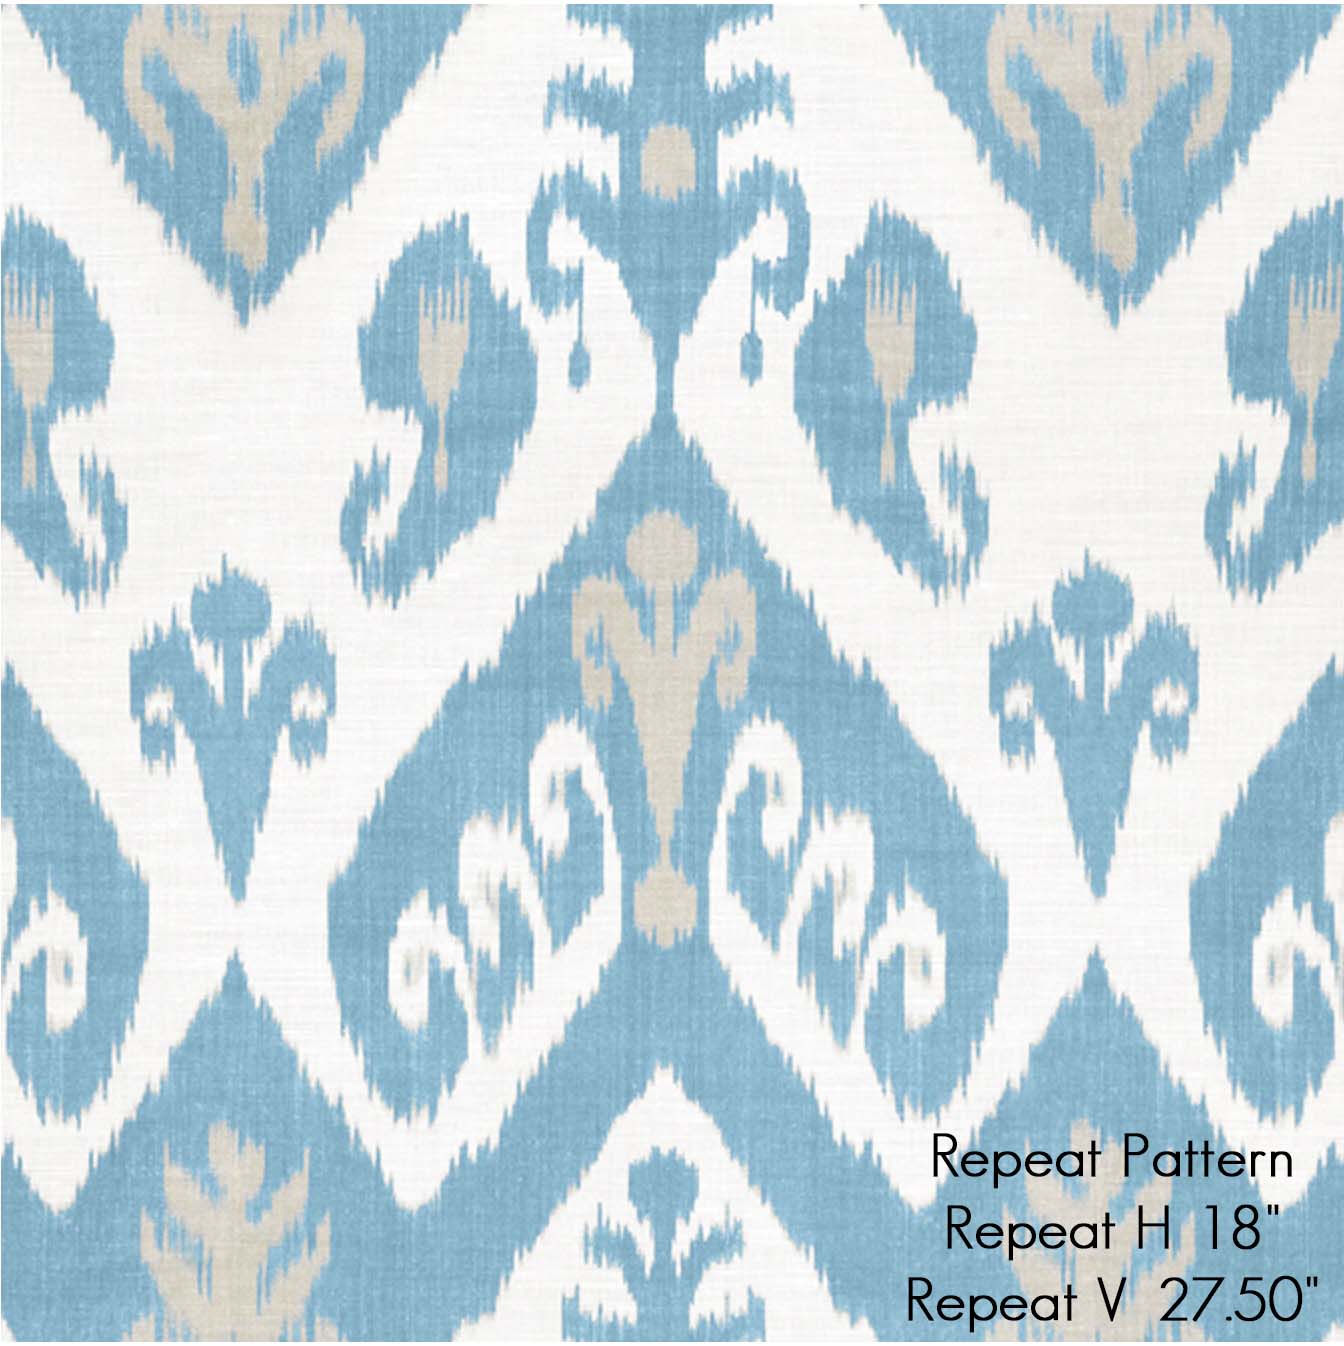 Thibaut Indies Ikat French Blue Large Scale Bold Graphic Designer Decorative Throw Pillow Cover Pattern Repeat